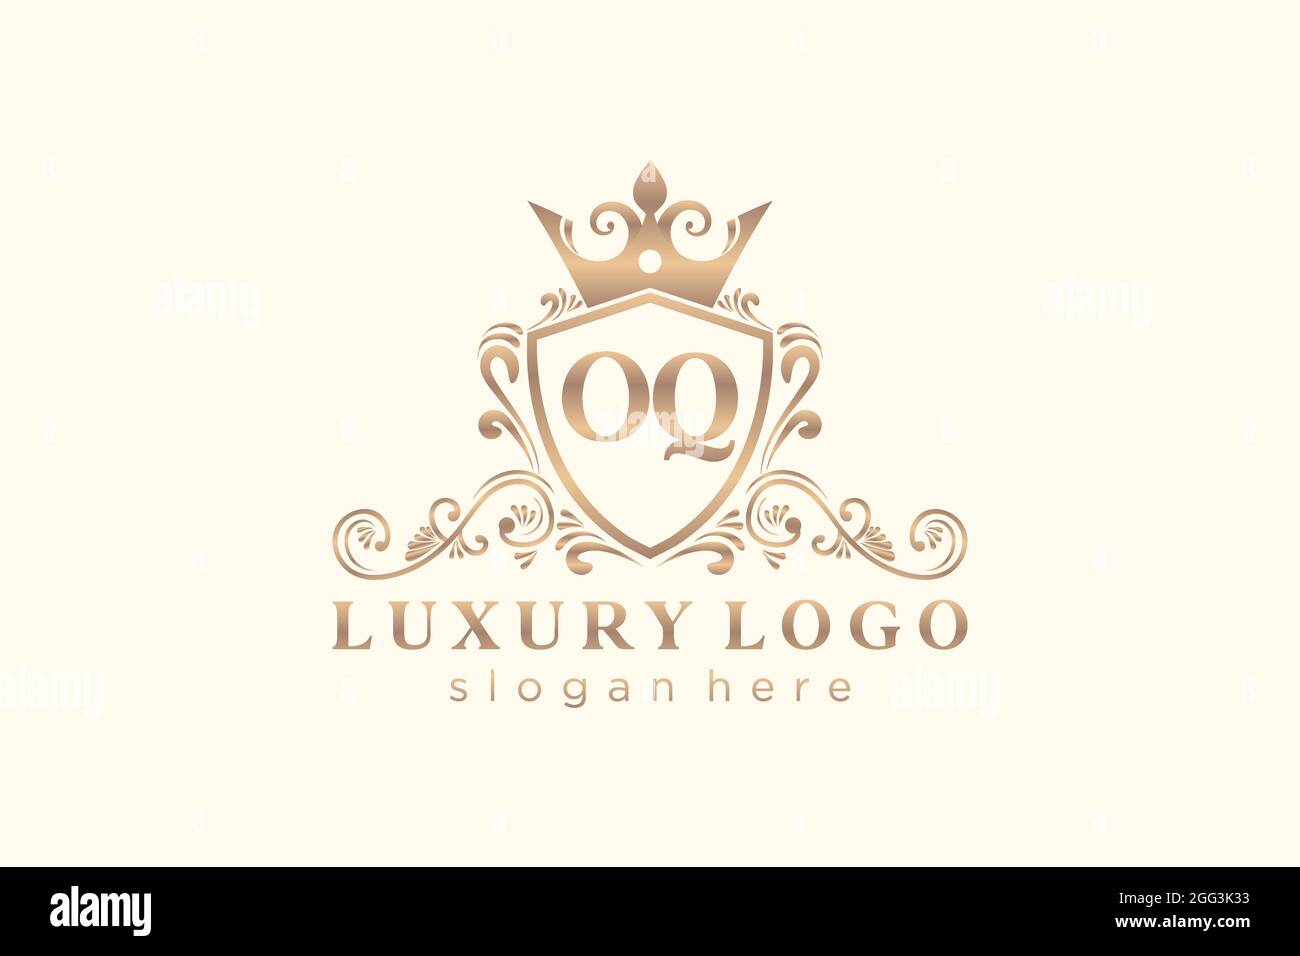 OQ Letter Royal Luxury Logo template in vector art for Restaurant, Royalty, Boutique, Cafe, Hotel, Heraldic, Jewelry, Fashion and other vector illustr Stock Vector